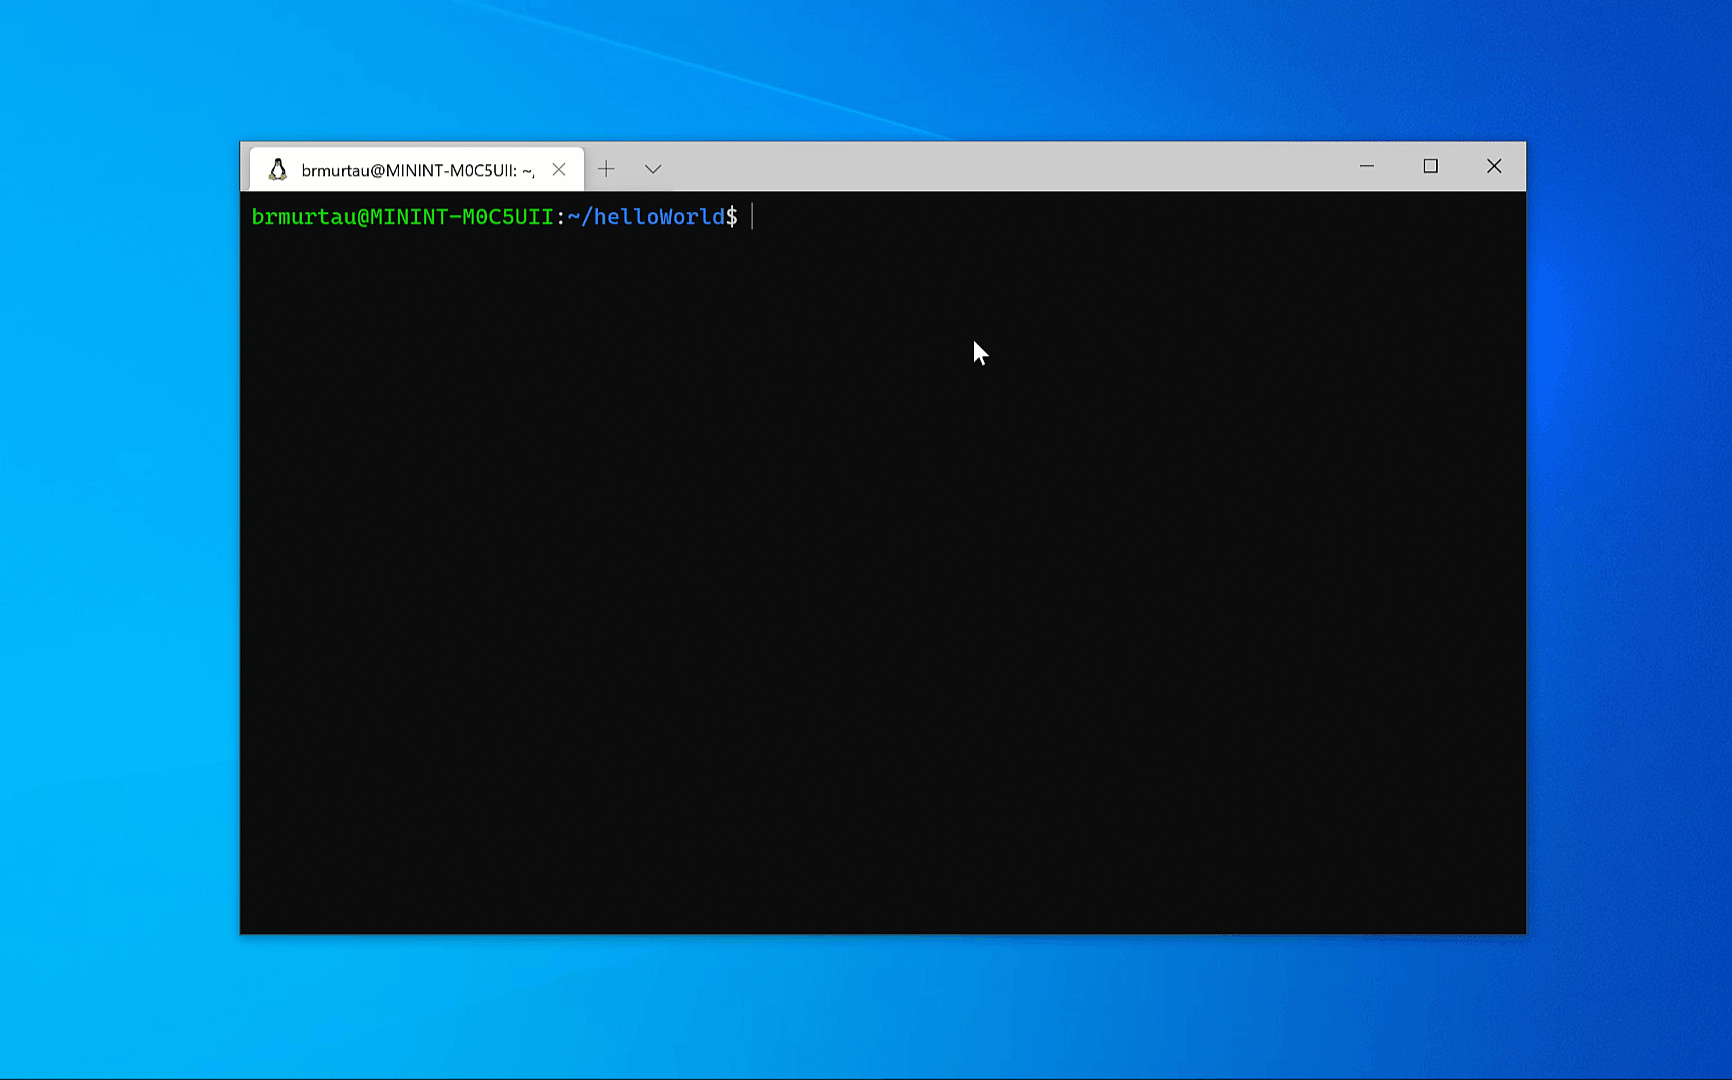 Using the WSL extension with an Ubuntu distro on WSL